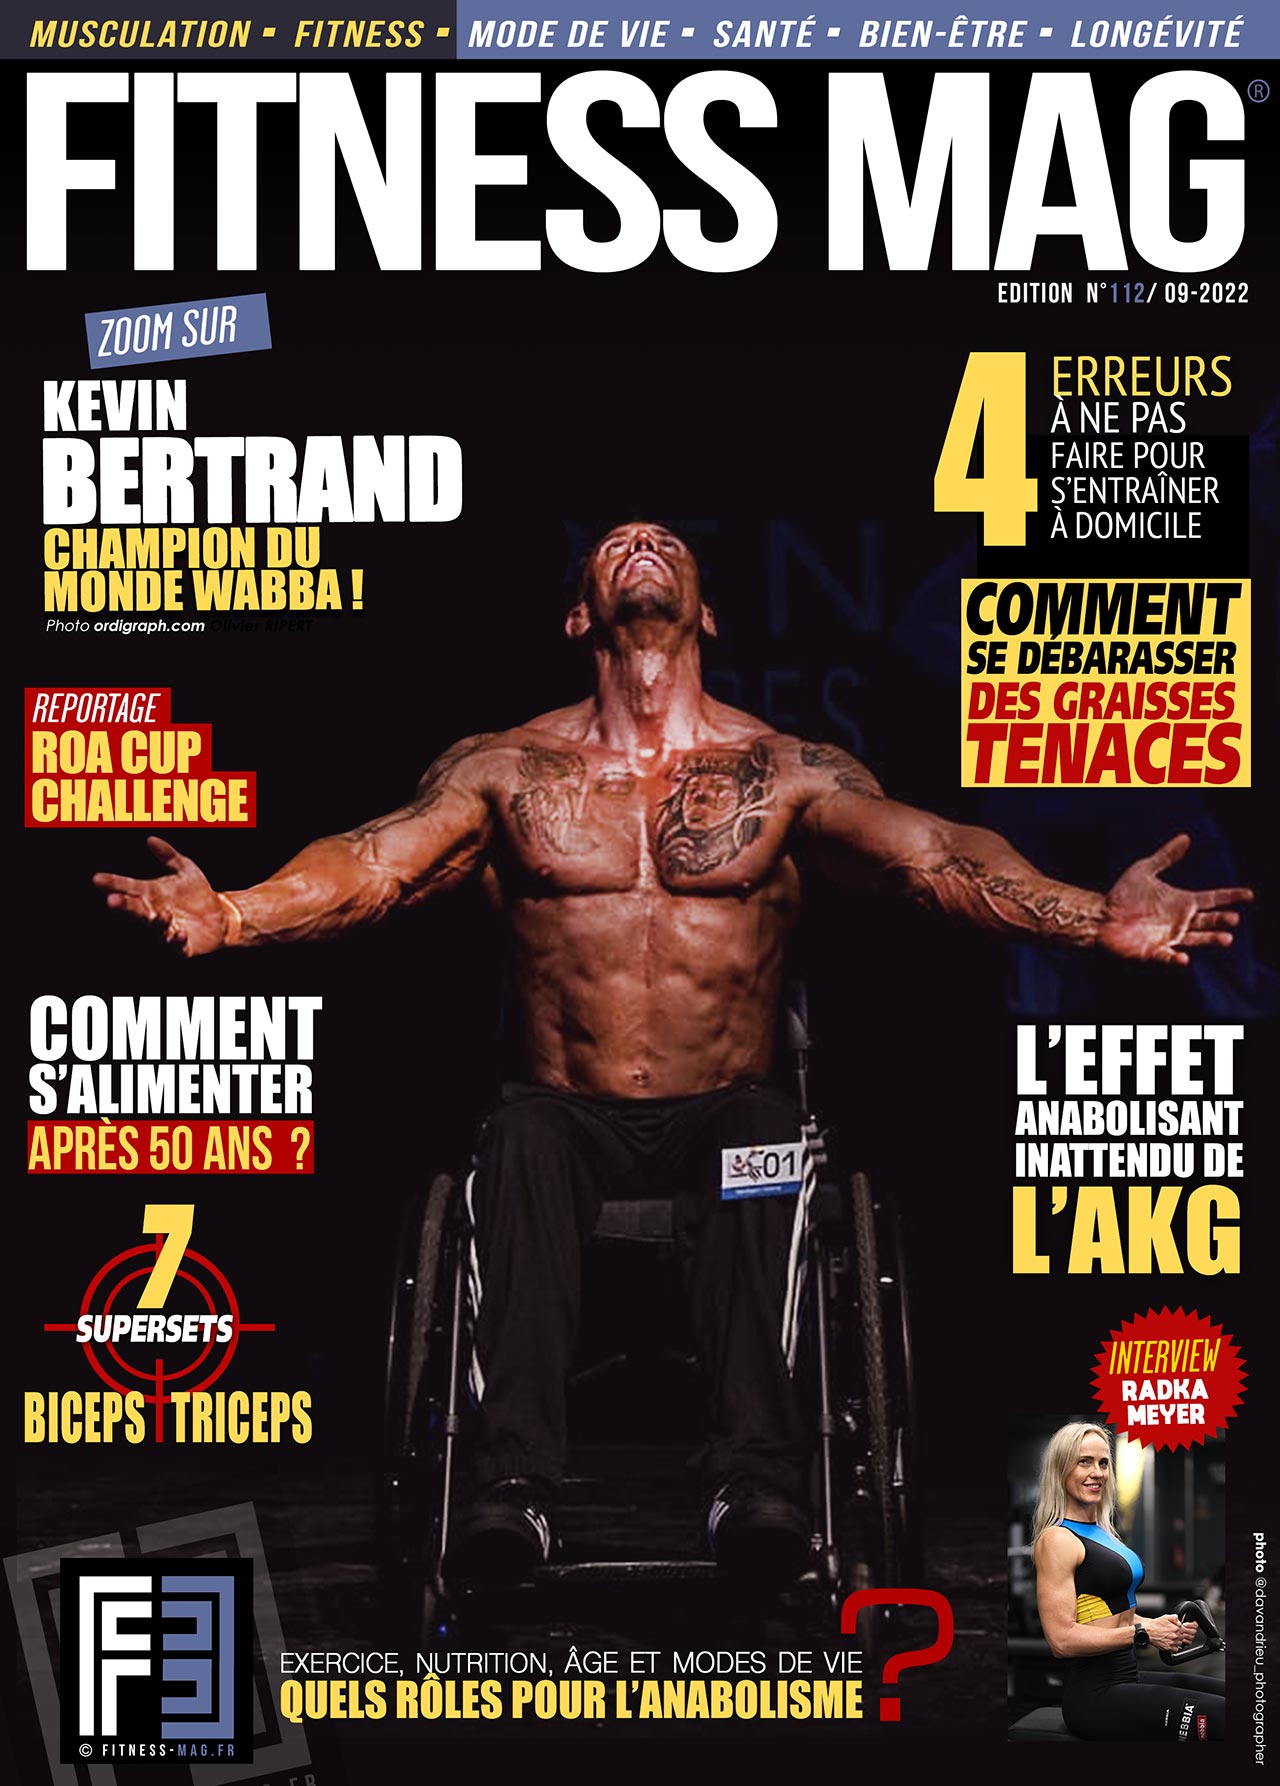 Fitness Mag N°112 septembre 2022